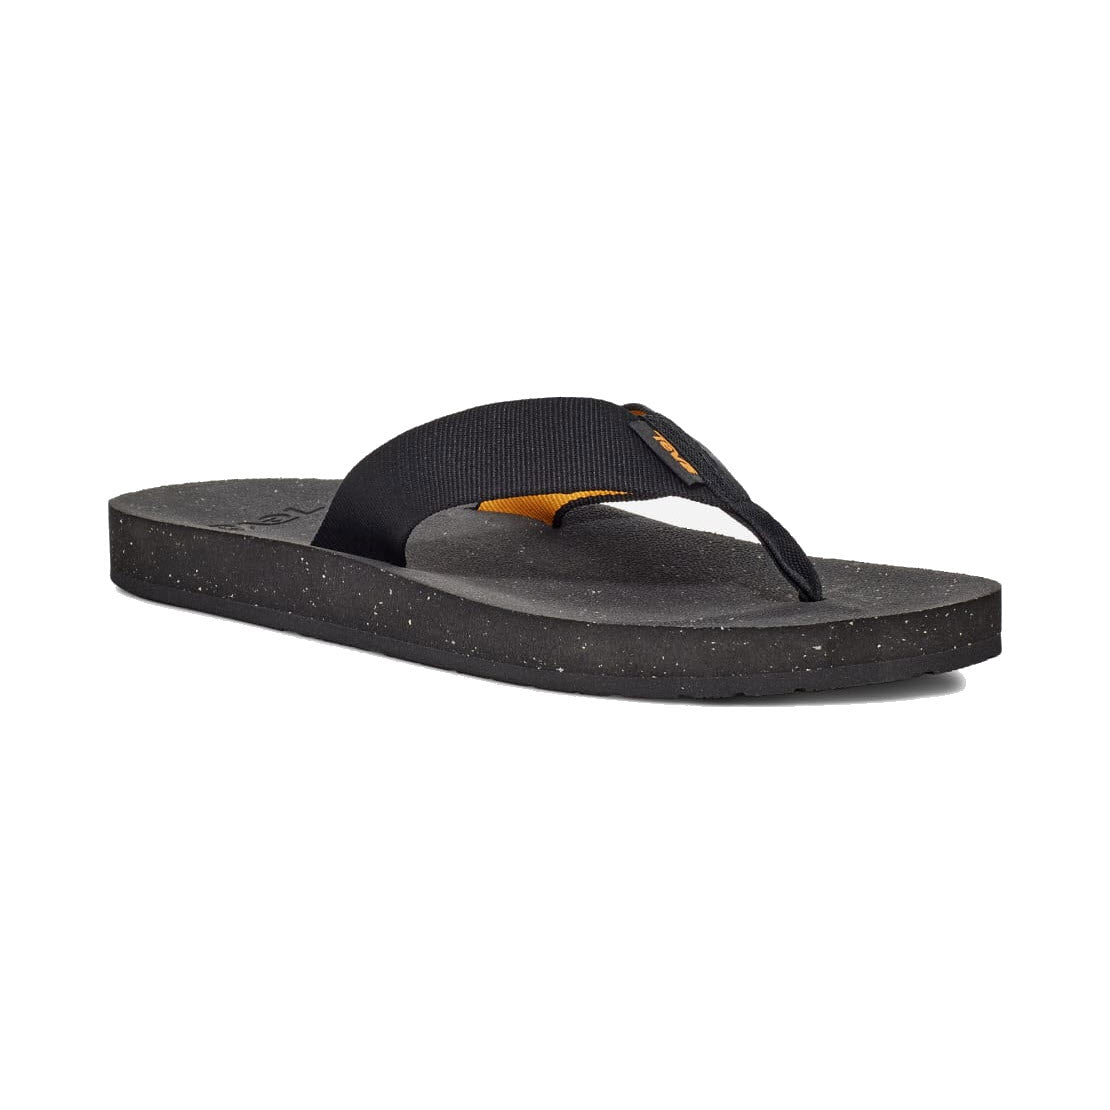 A TEVA REFLIP BLACK - MENS travel sandal by Teva, featuring a textured foam sole made from recycled content and a fabric thong strap.